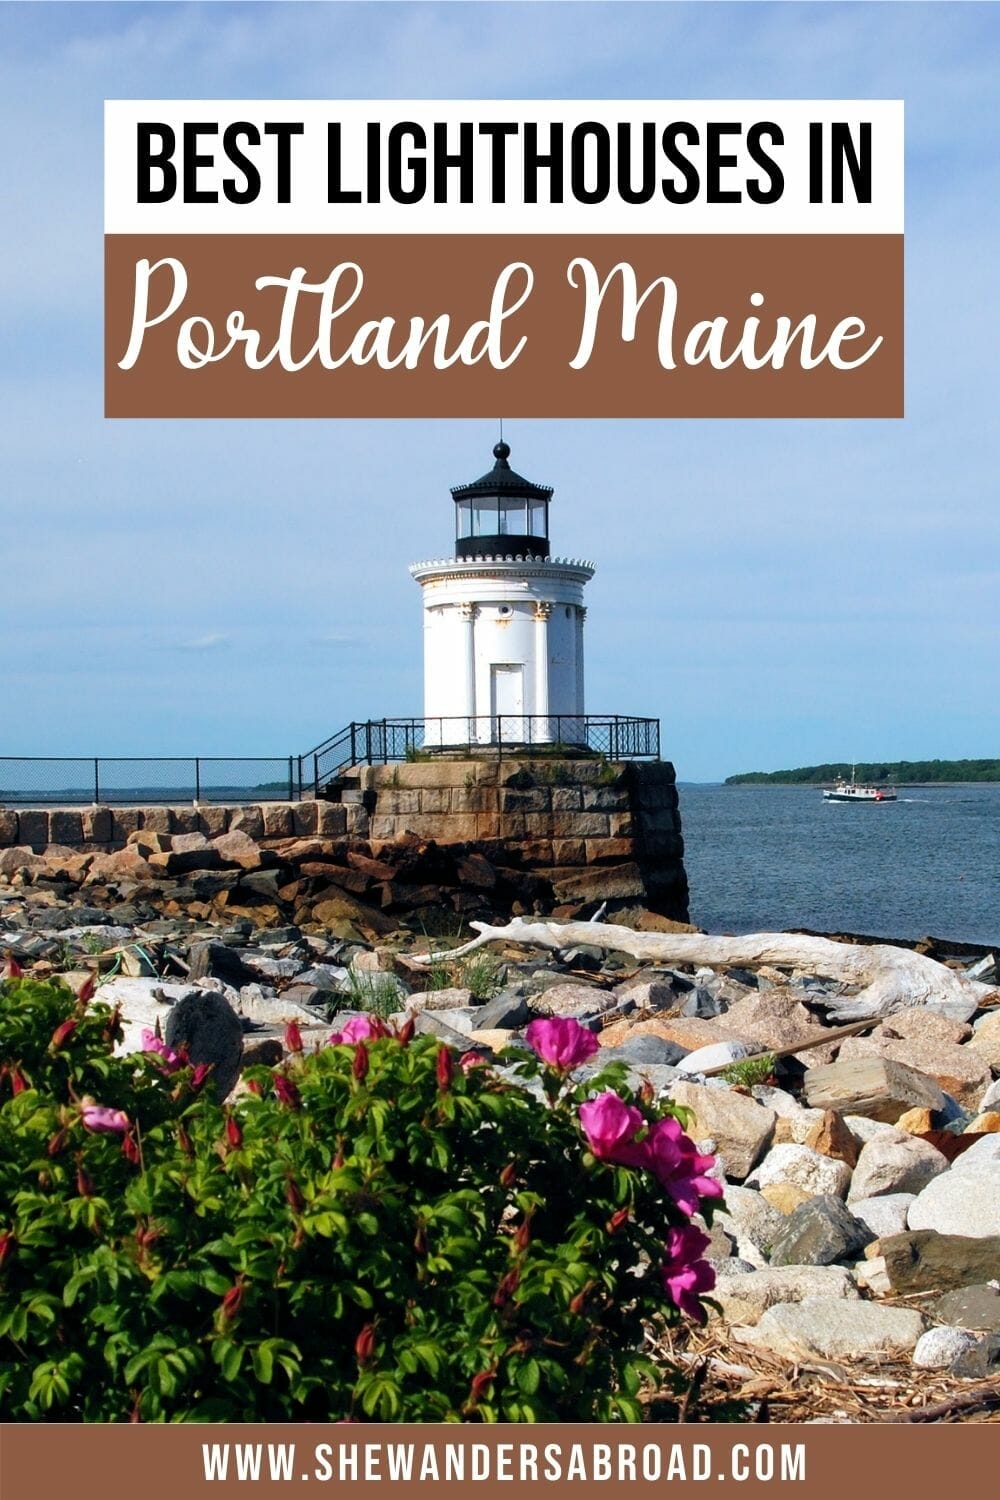 5 Prettiest Lighthouses in Portland Maine You Can’t Miss